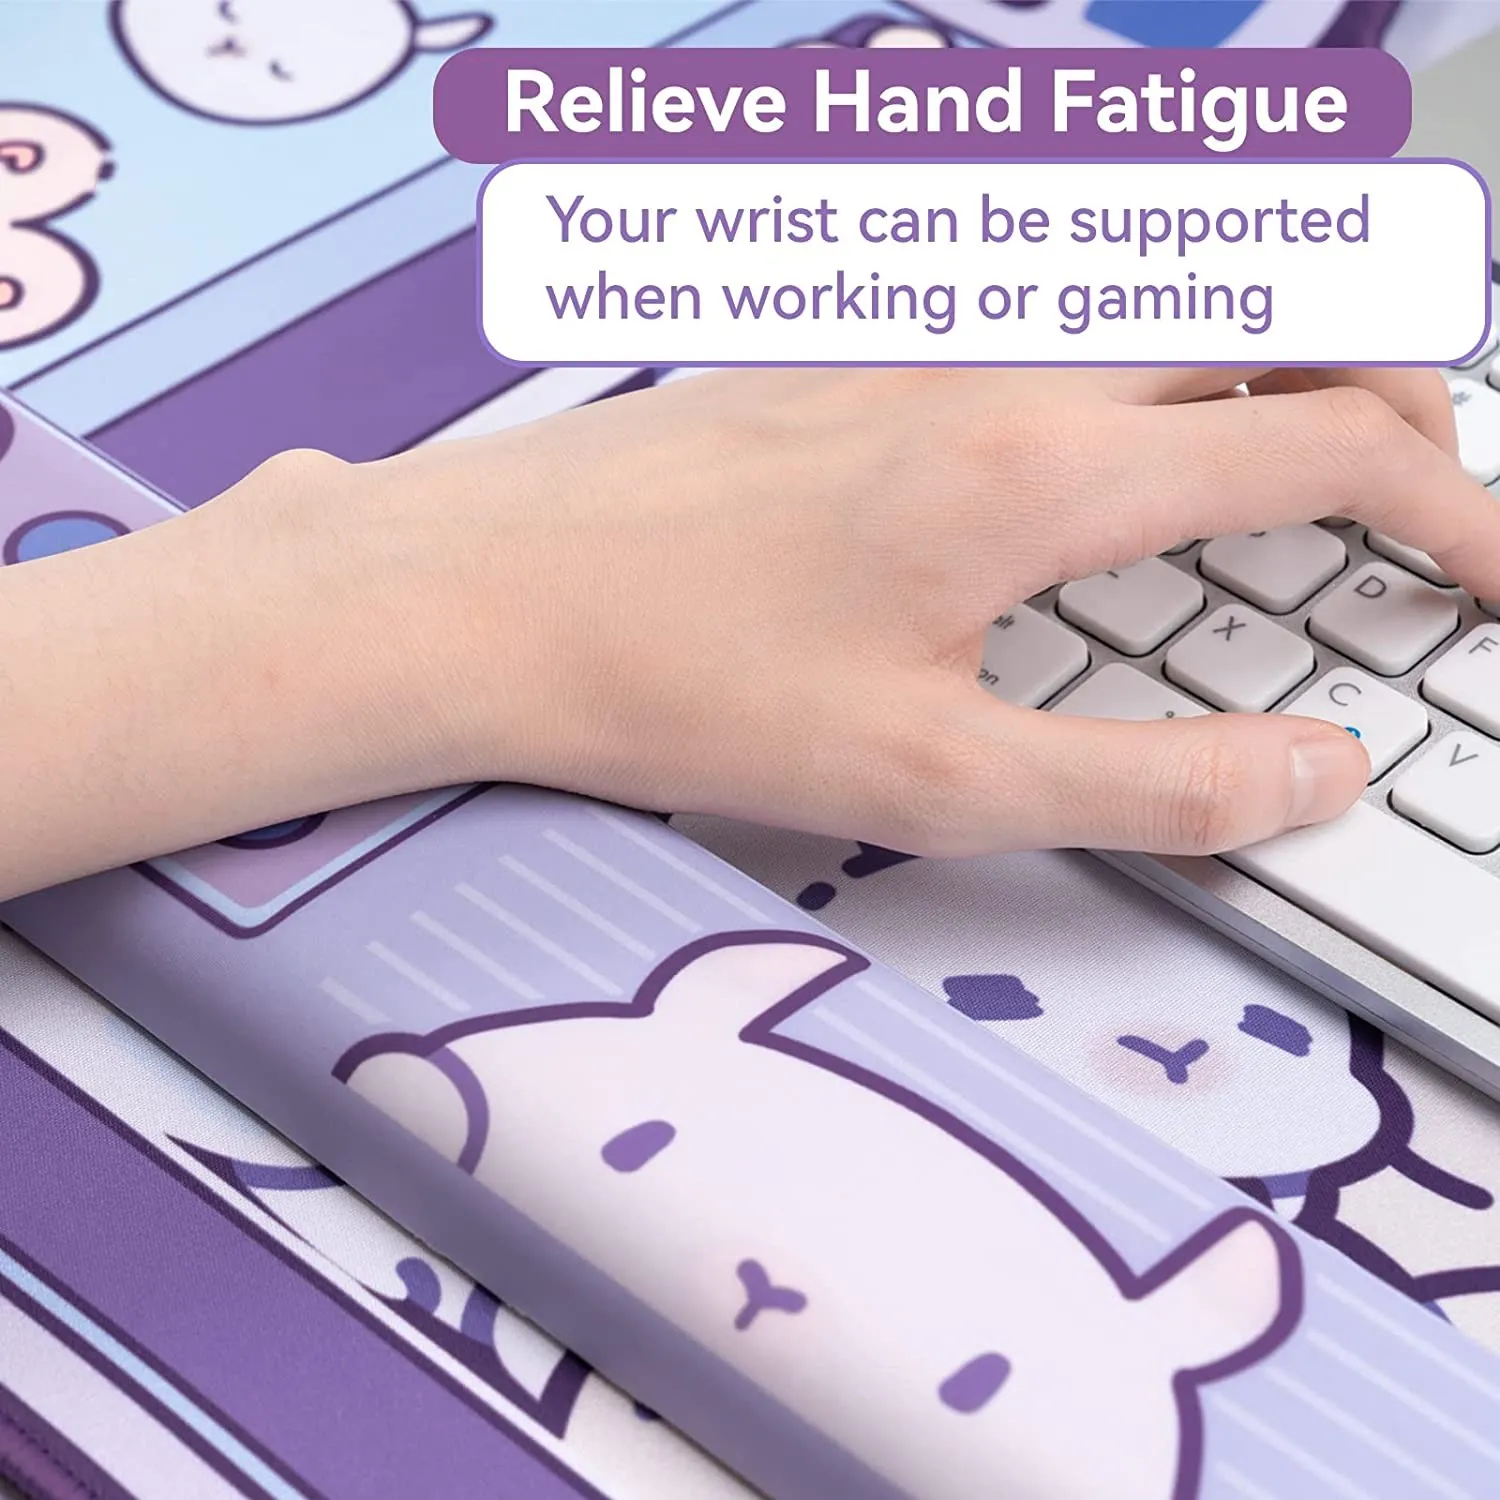 https://ae01.alicdn.com/kf/S104bb913a355468ba31be23cd2b1c551E/Kawaii-Rabbit-Trap-Gaming-Mouse-Pad-44cm-80cm-Super-Cute-Thickened-Office-Computer-Big-Mouse-Pad.jpg